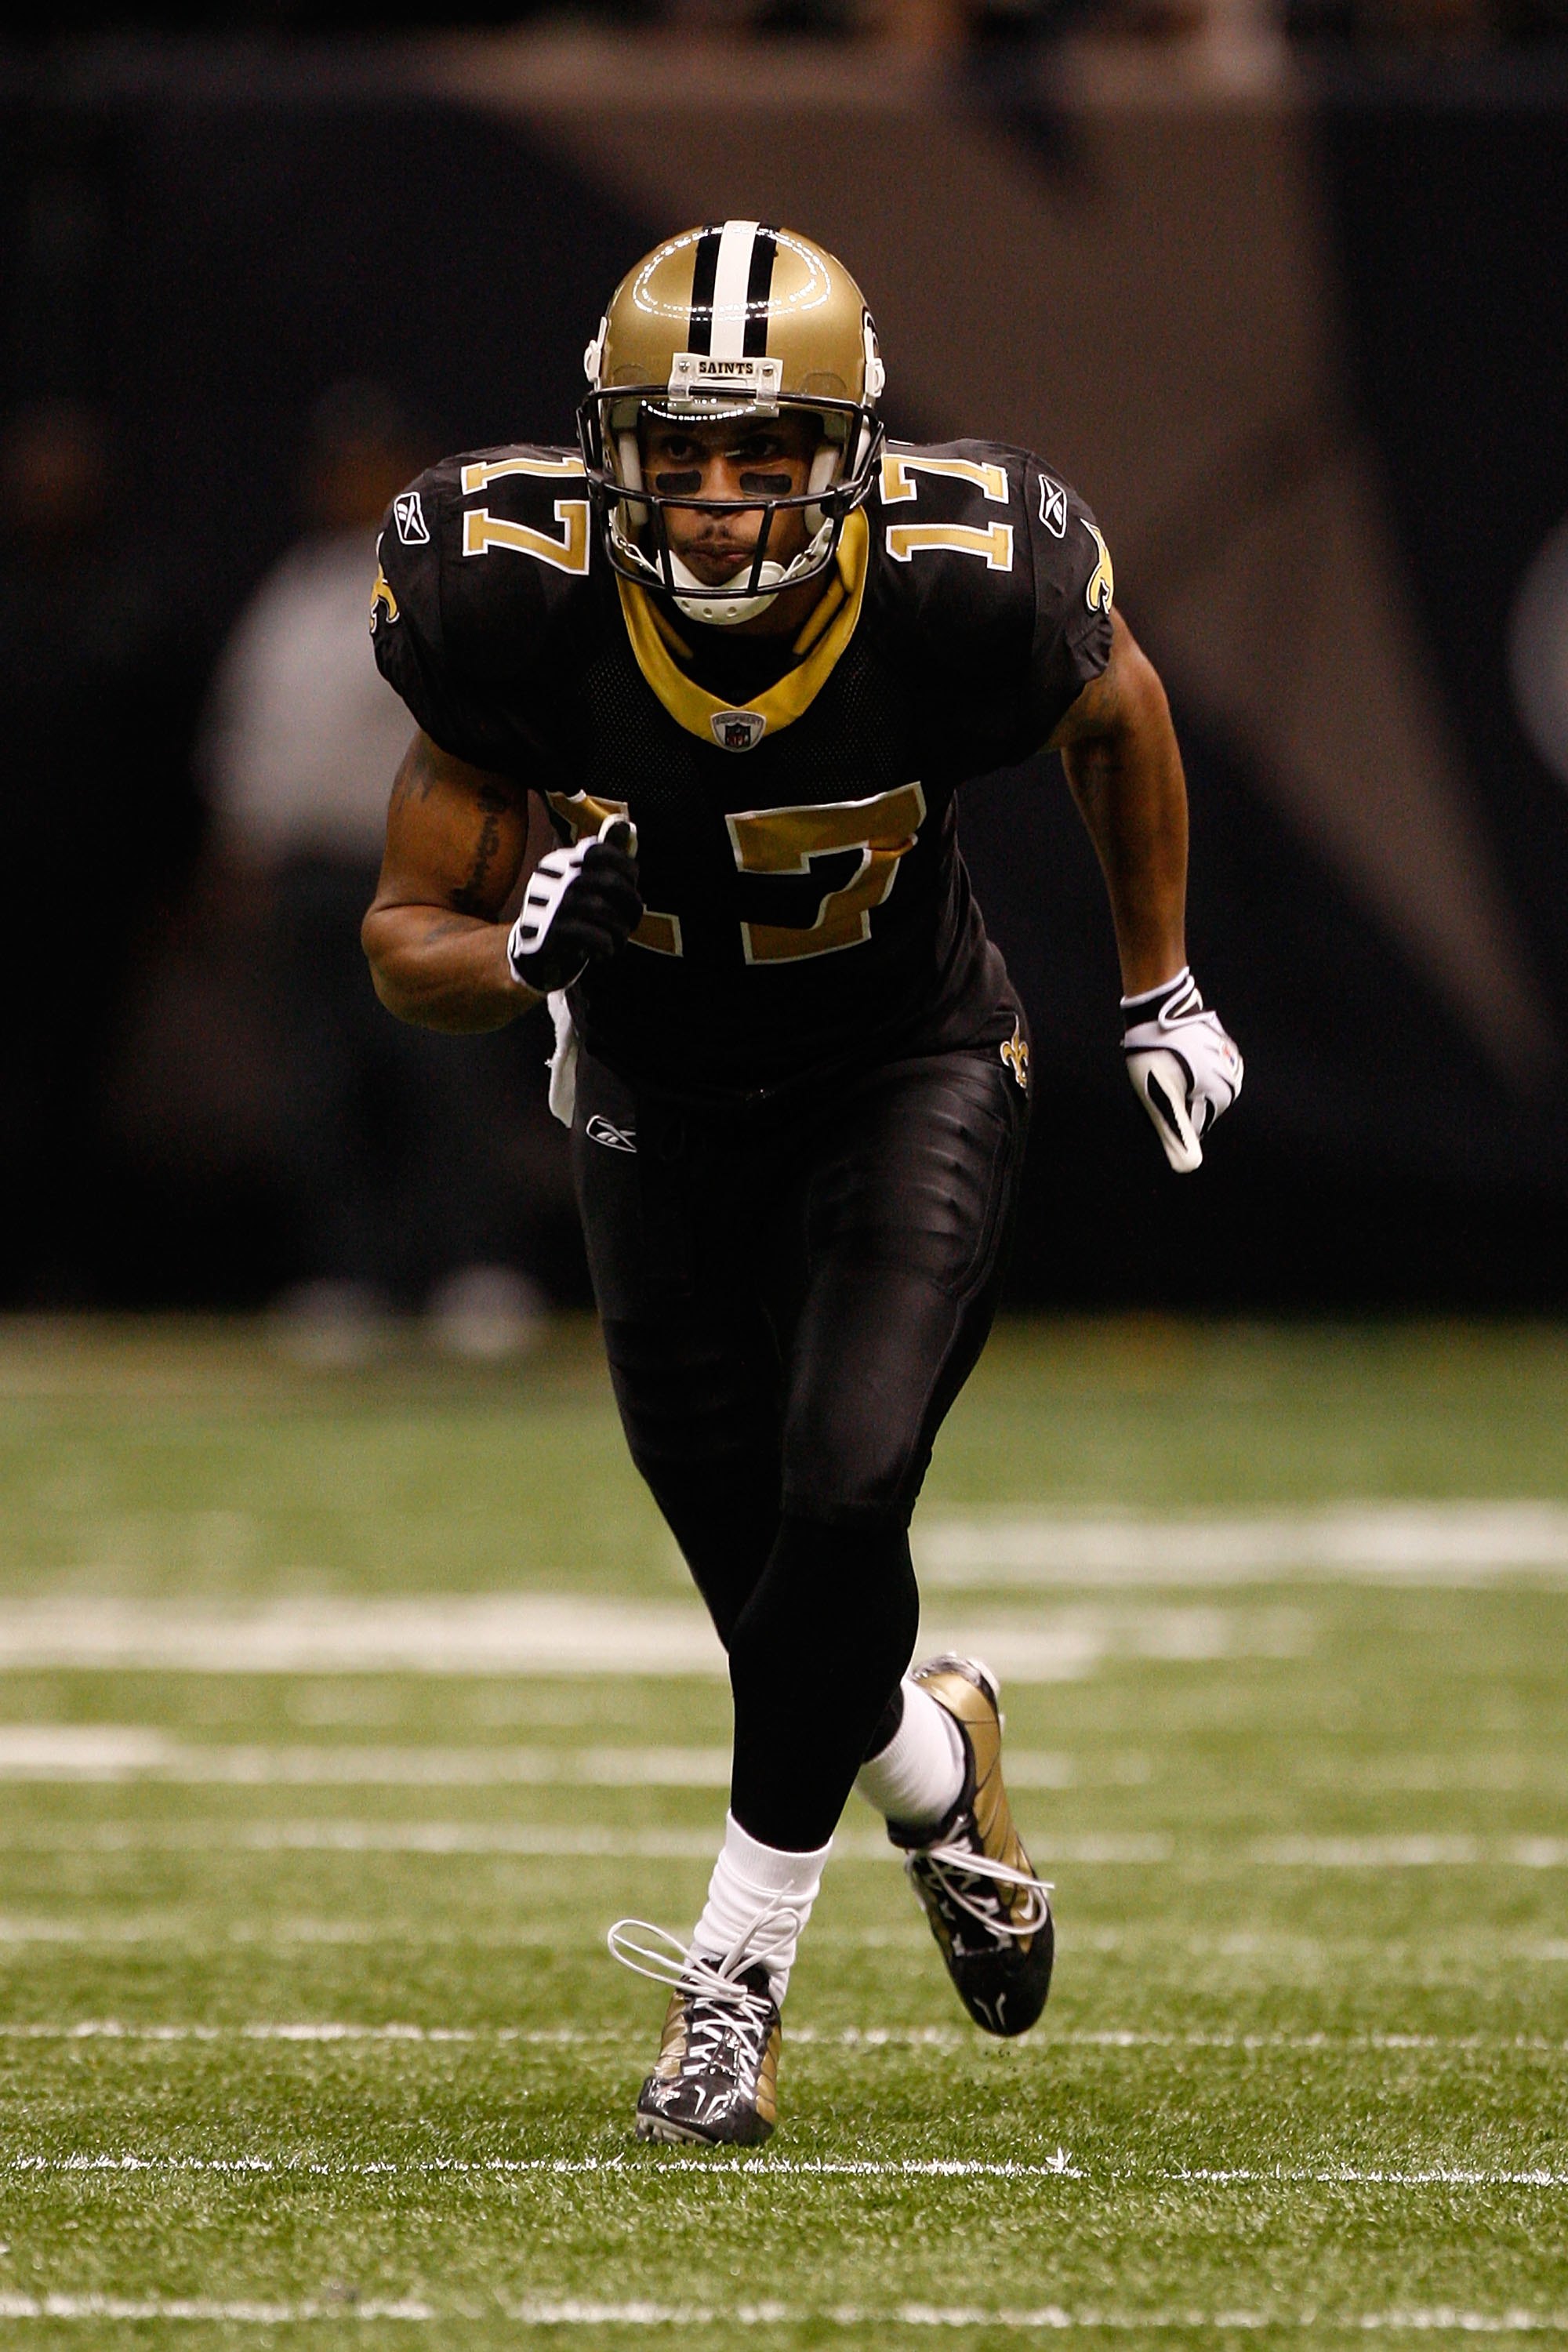 NEW ORLEANS - DECEMBER 27:  Robert Meachem #17 of the New Orleans Saints takes off during the game against the Tampa Bay Buccaneers at the Louisiana Superdome on December 27, 2009 in New Orleans, Louisiana.  (Photo by Chris Graythen/Getty Images)